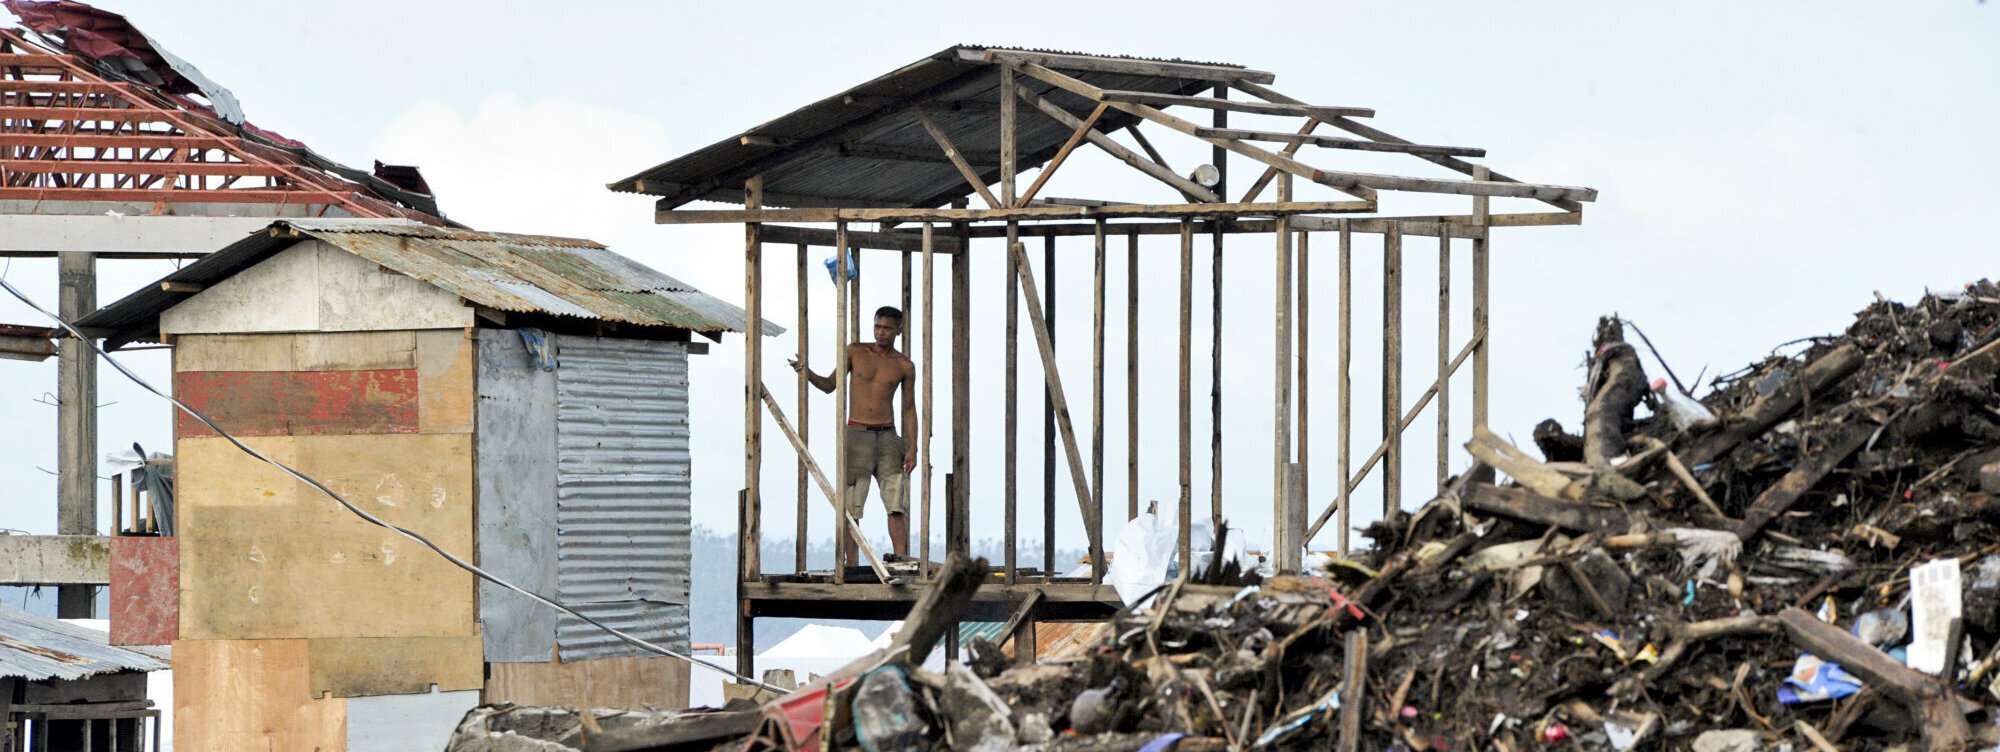 Man overviewing disaster scene after Typhoon Haiyan in the Philippines, 2013